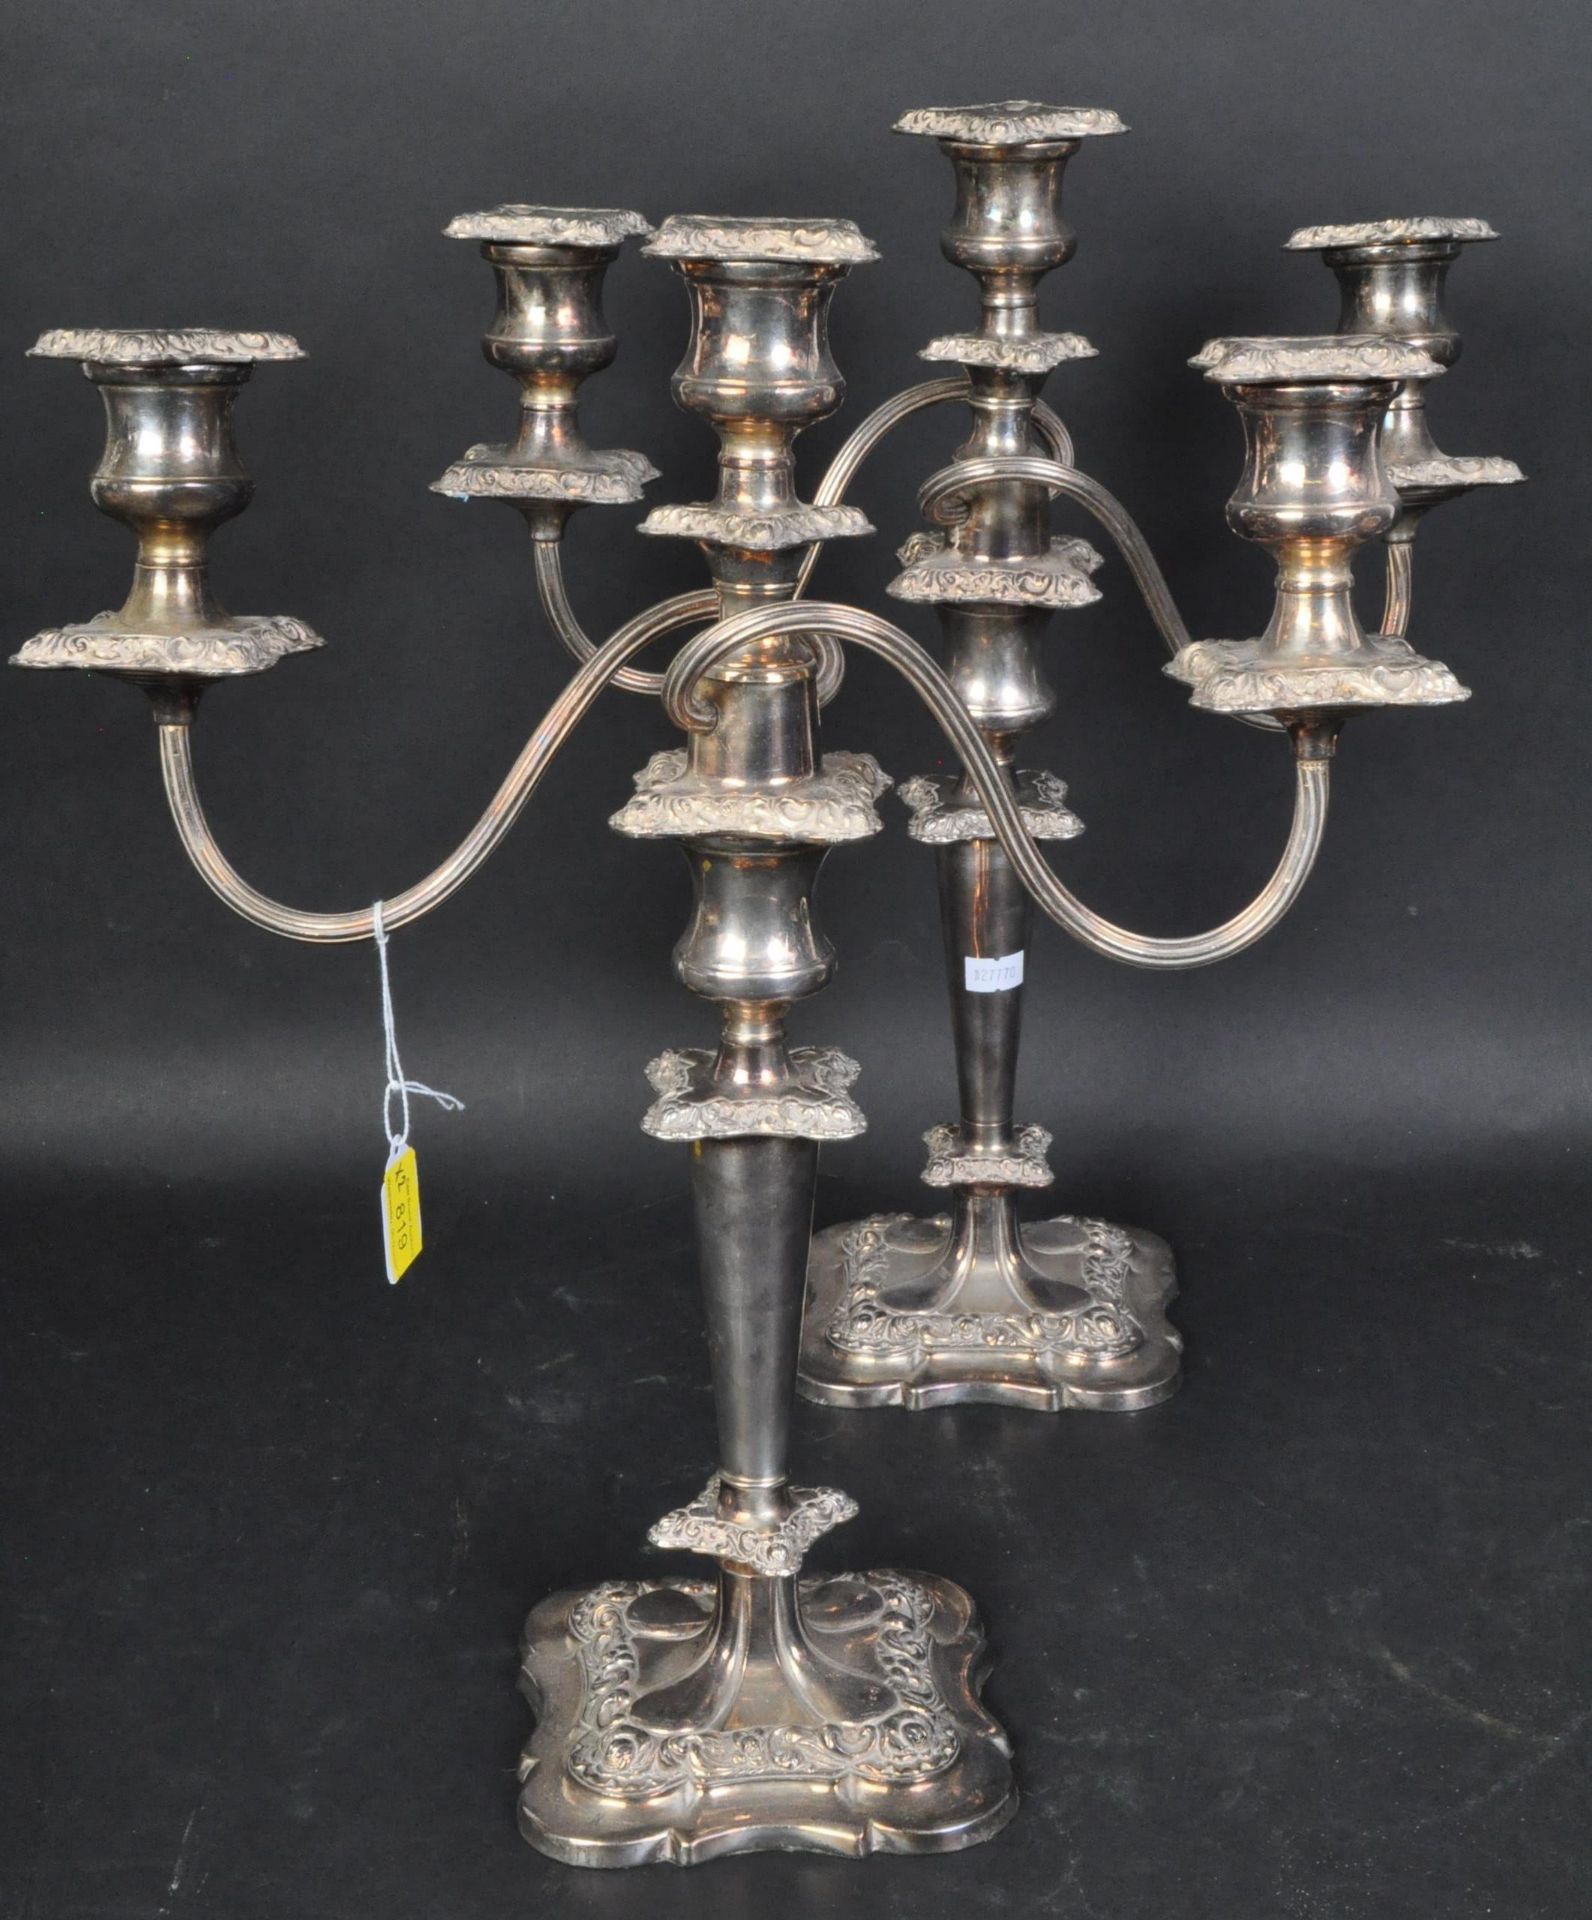 PAIR OF VINTAGE SILVER PLATED CANDLESTICK CANDELABRAS